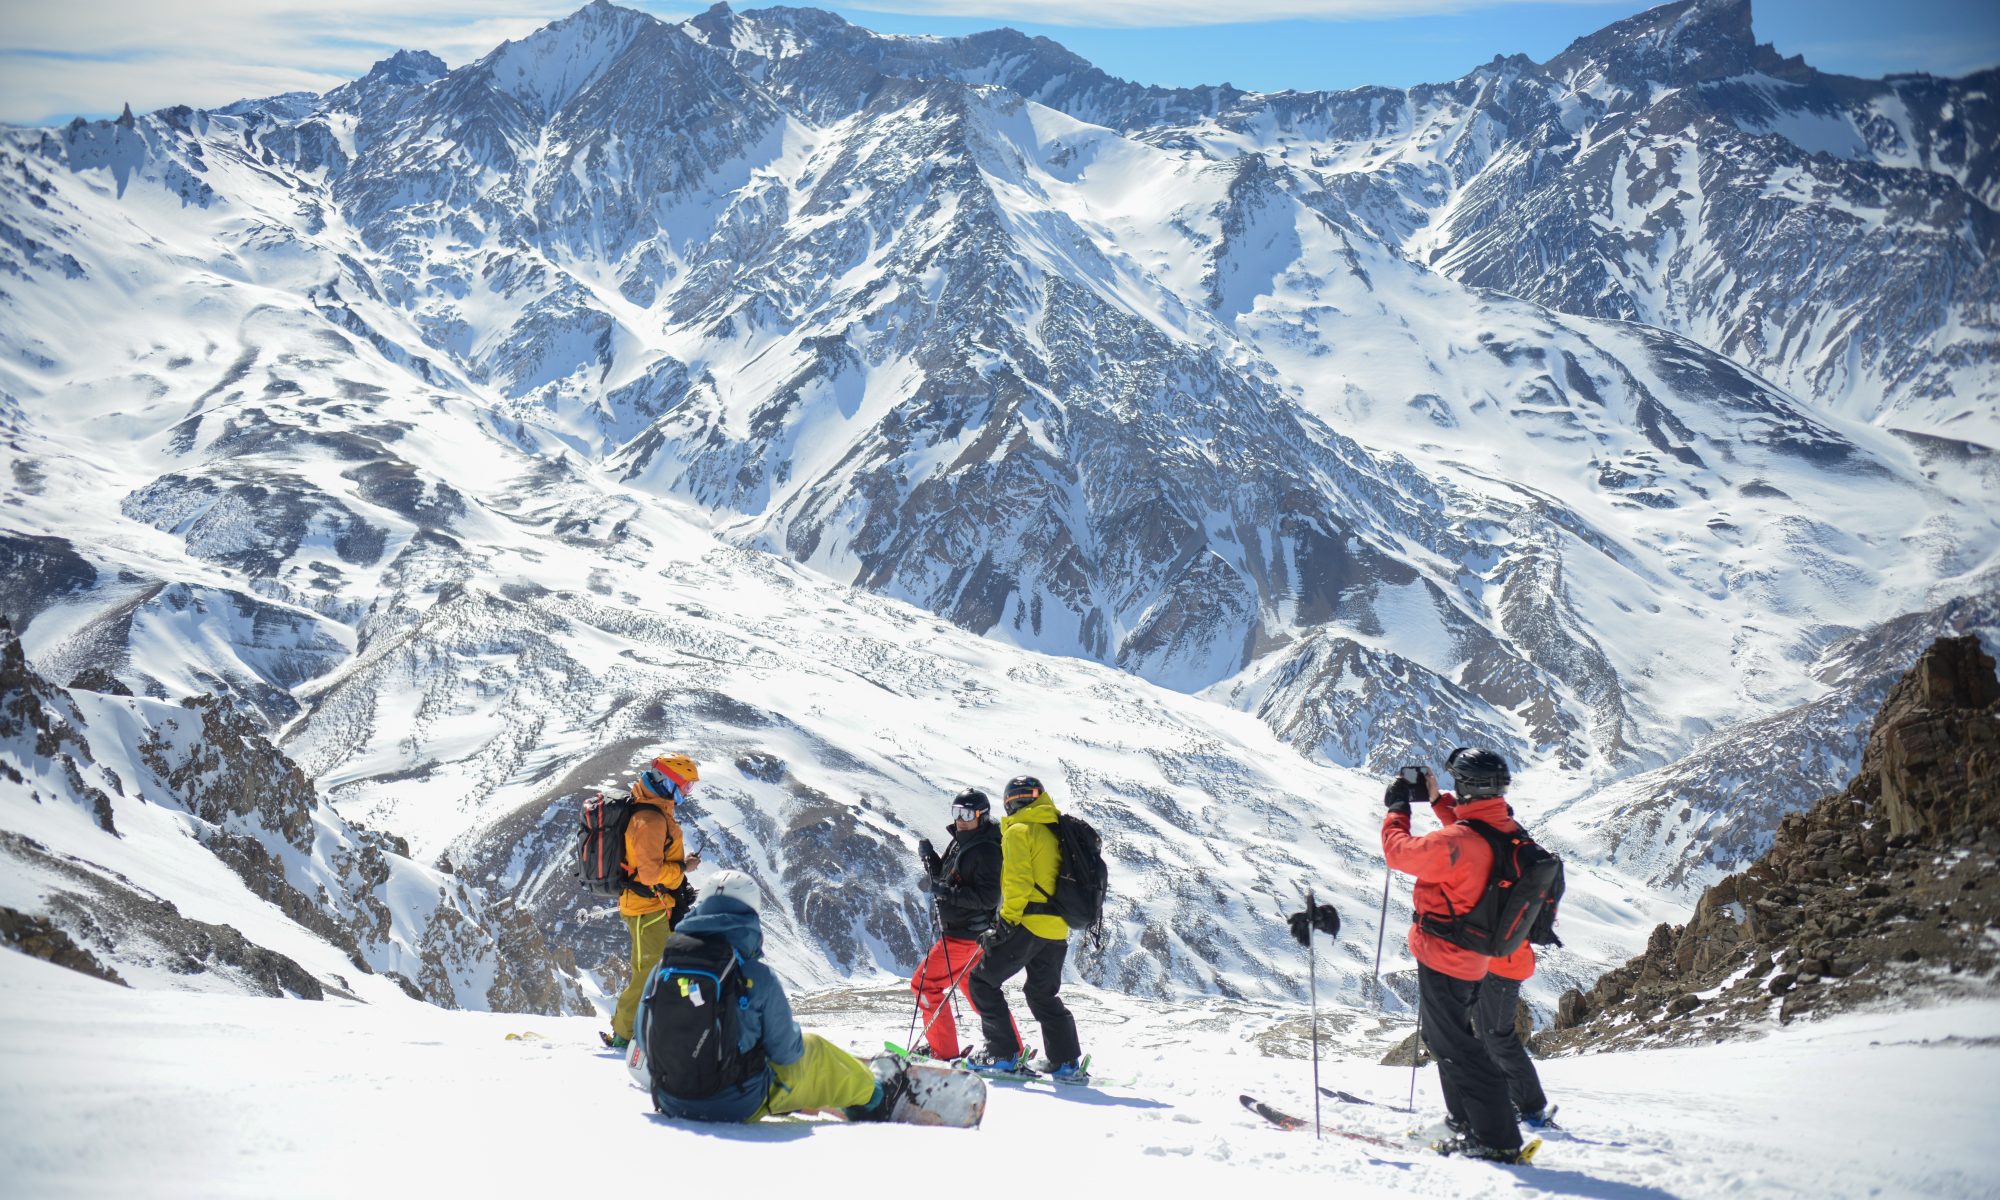 Las Leñas peak in the background, that triangle shape on the right hand side of the picture - the expanse of Las Leñas is incredible! - Photo by Las Leñas ski resort. Focus on South American Ski Resorts- High Andes: Valle Nevado, Portillo and Las Leñas – Chile and Argentina